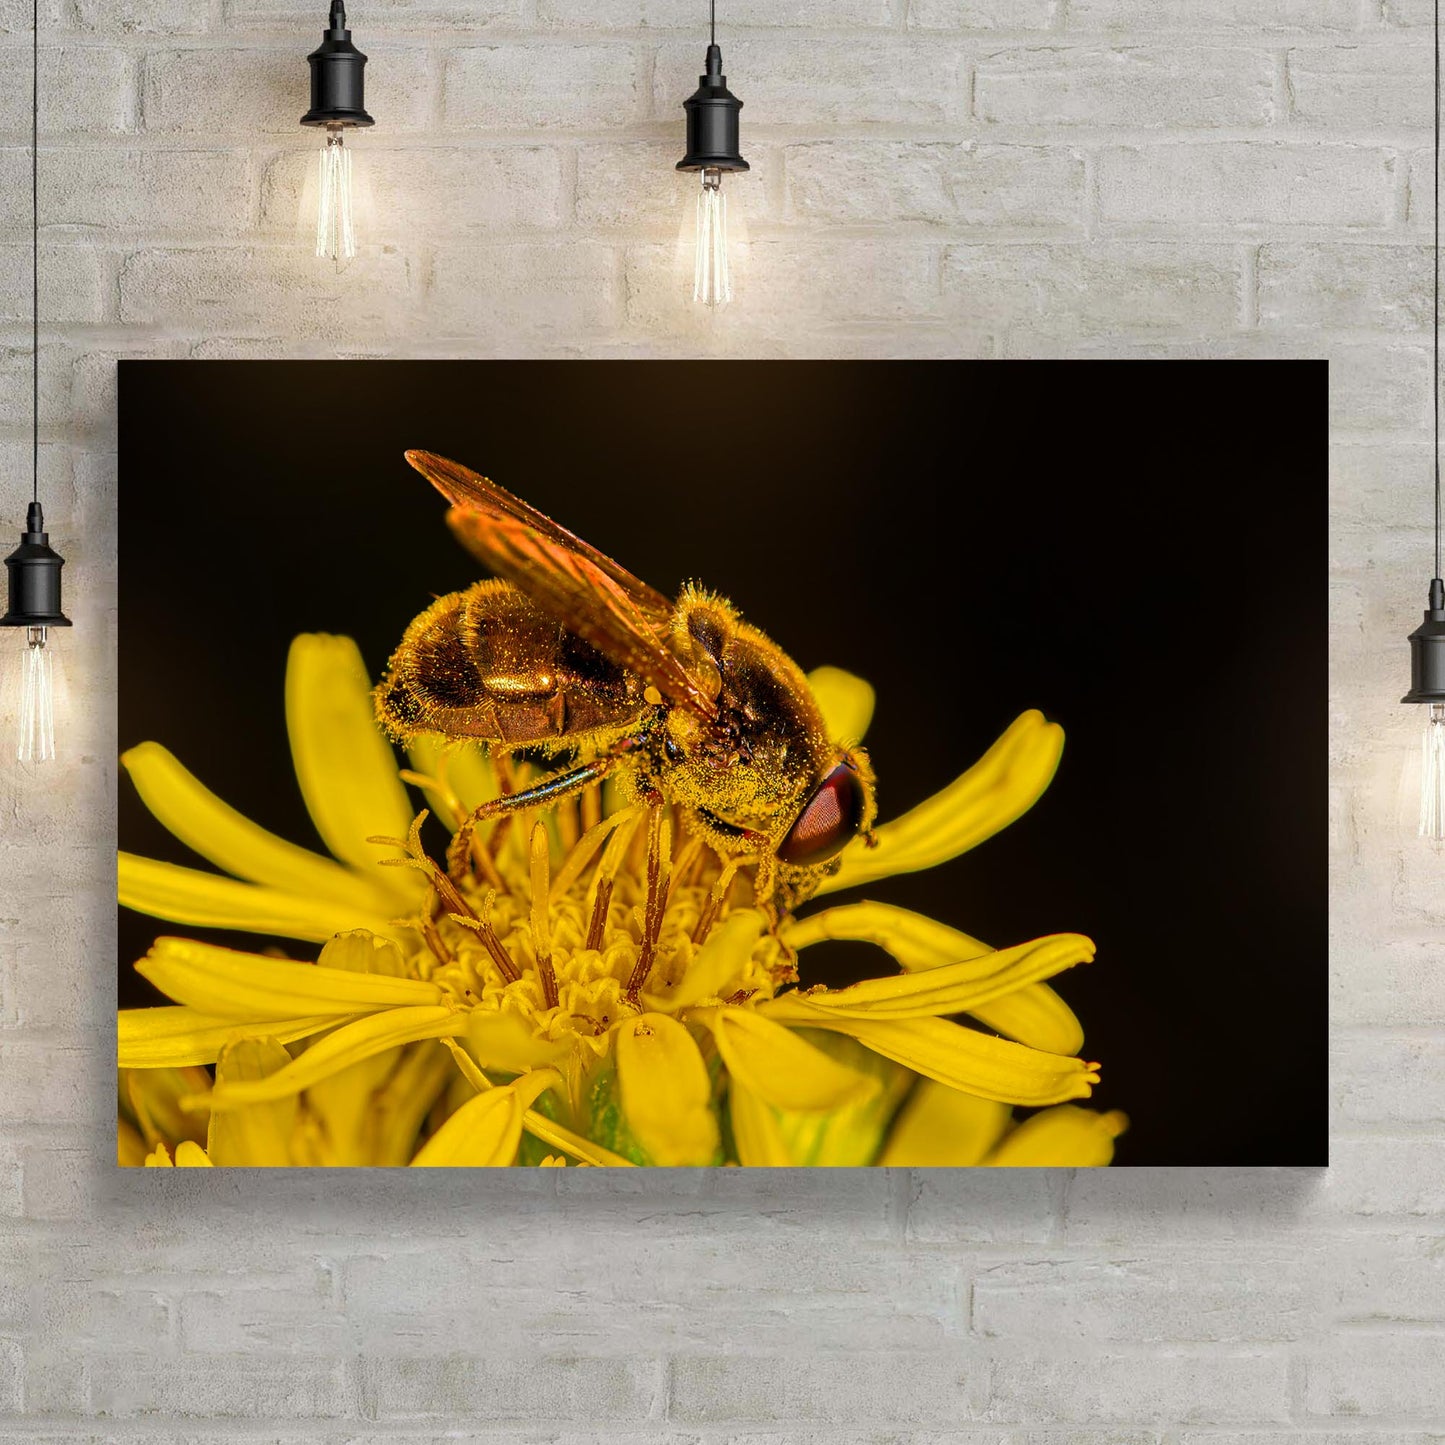 Bee At Work Canvas Wall Art - Image by Tailored Canvases